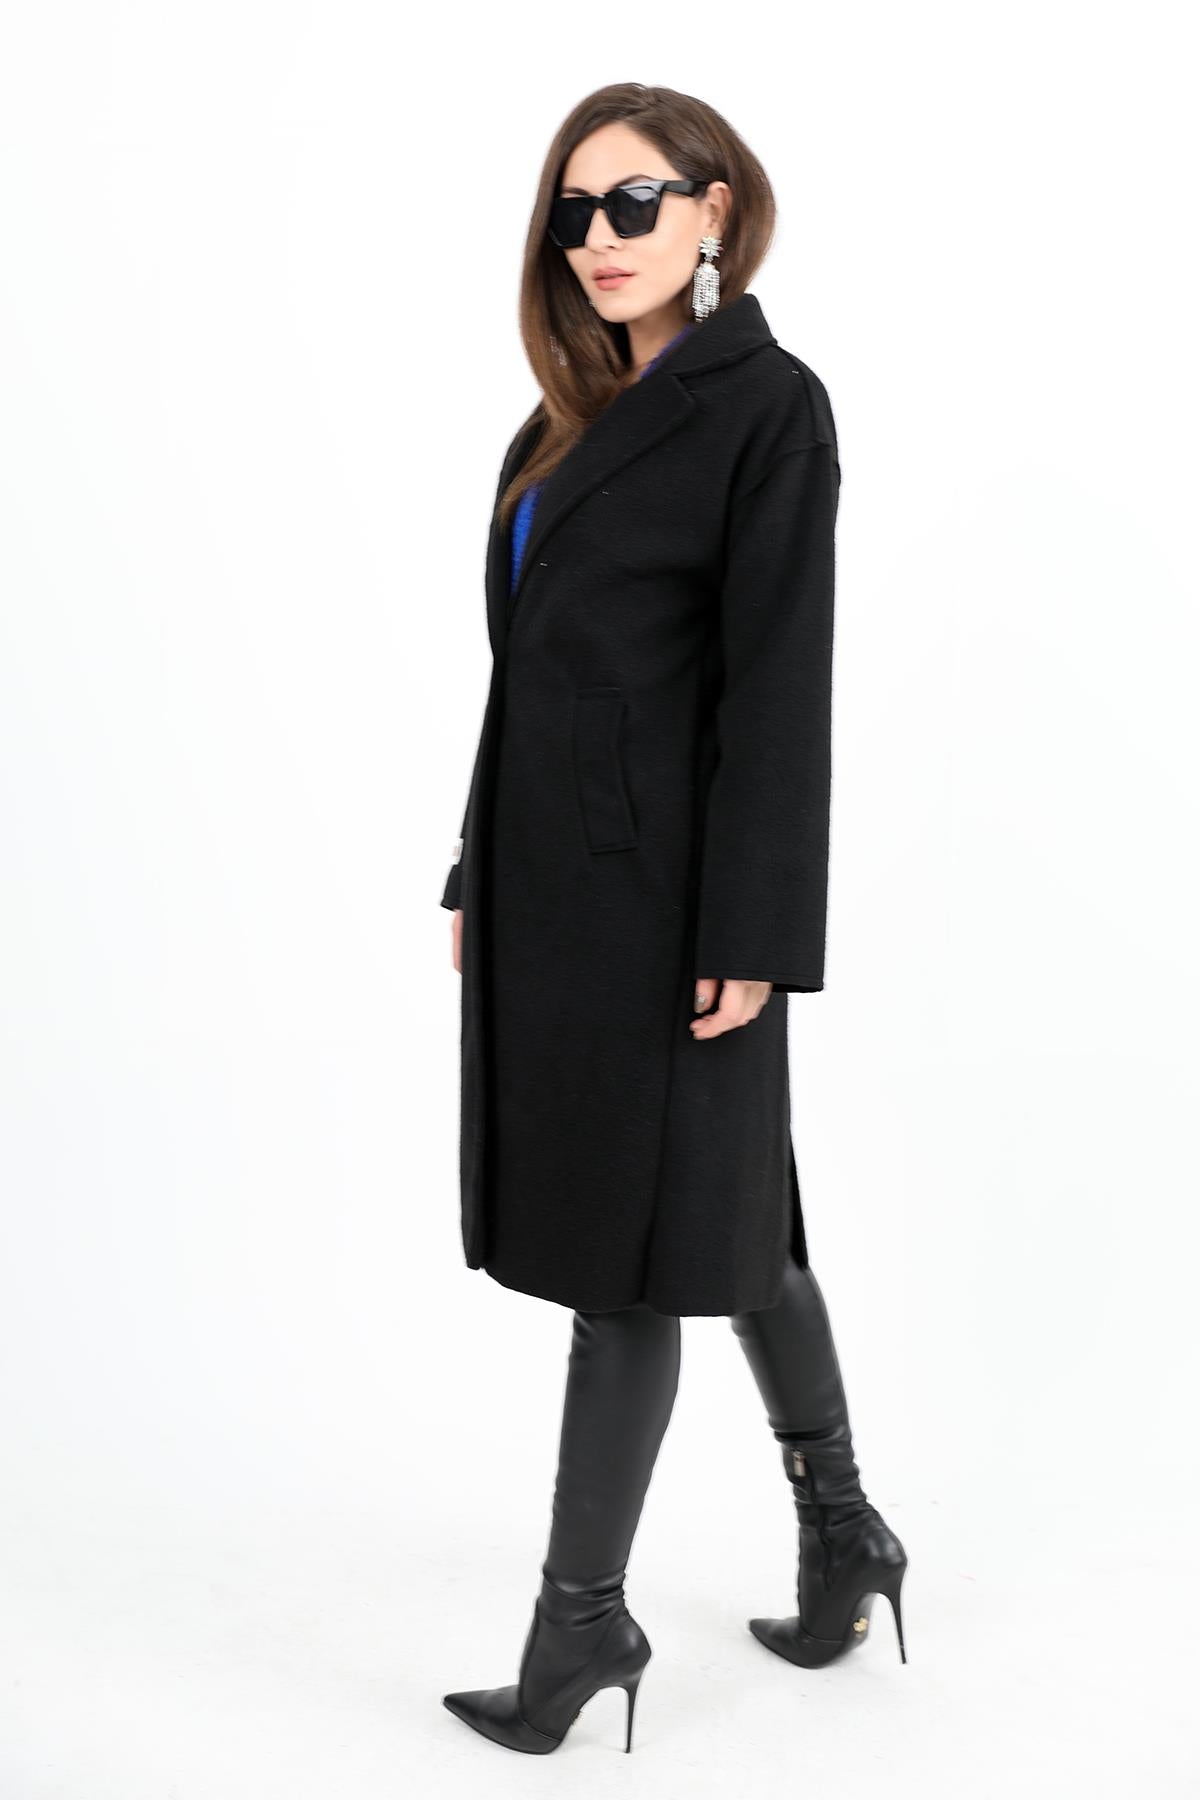 Women's Cashmere Coat Double-Breasted Collar Sleeve with Crest Detail - Black - STREETMODE ™